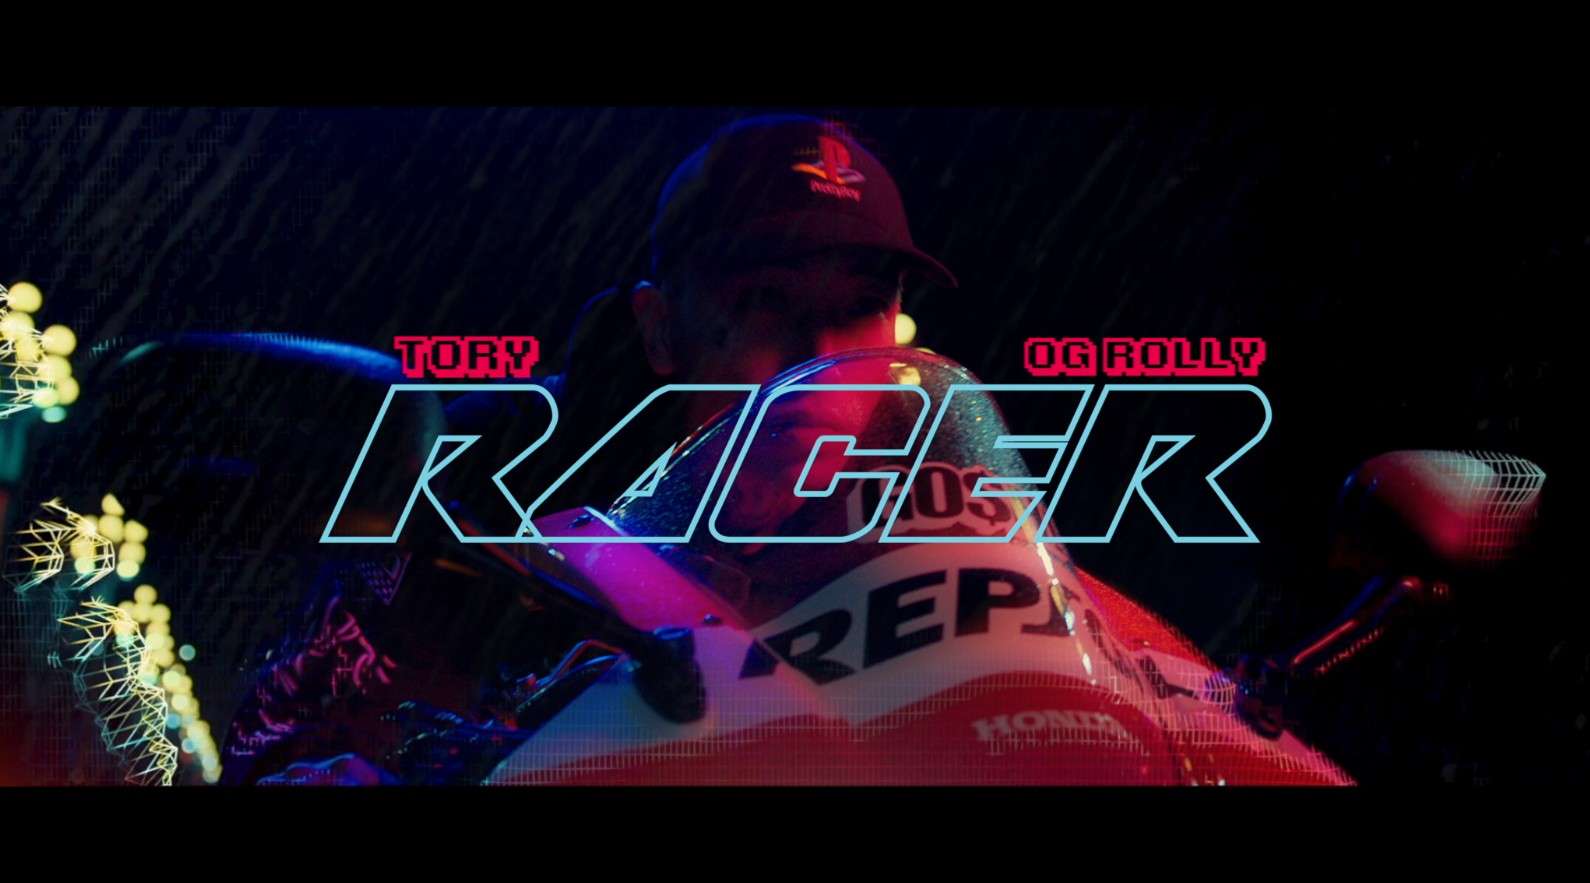 Tory Feat. OG Rolly - RACER (Gosh Music Official Video)